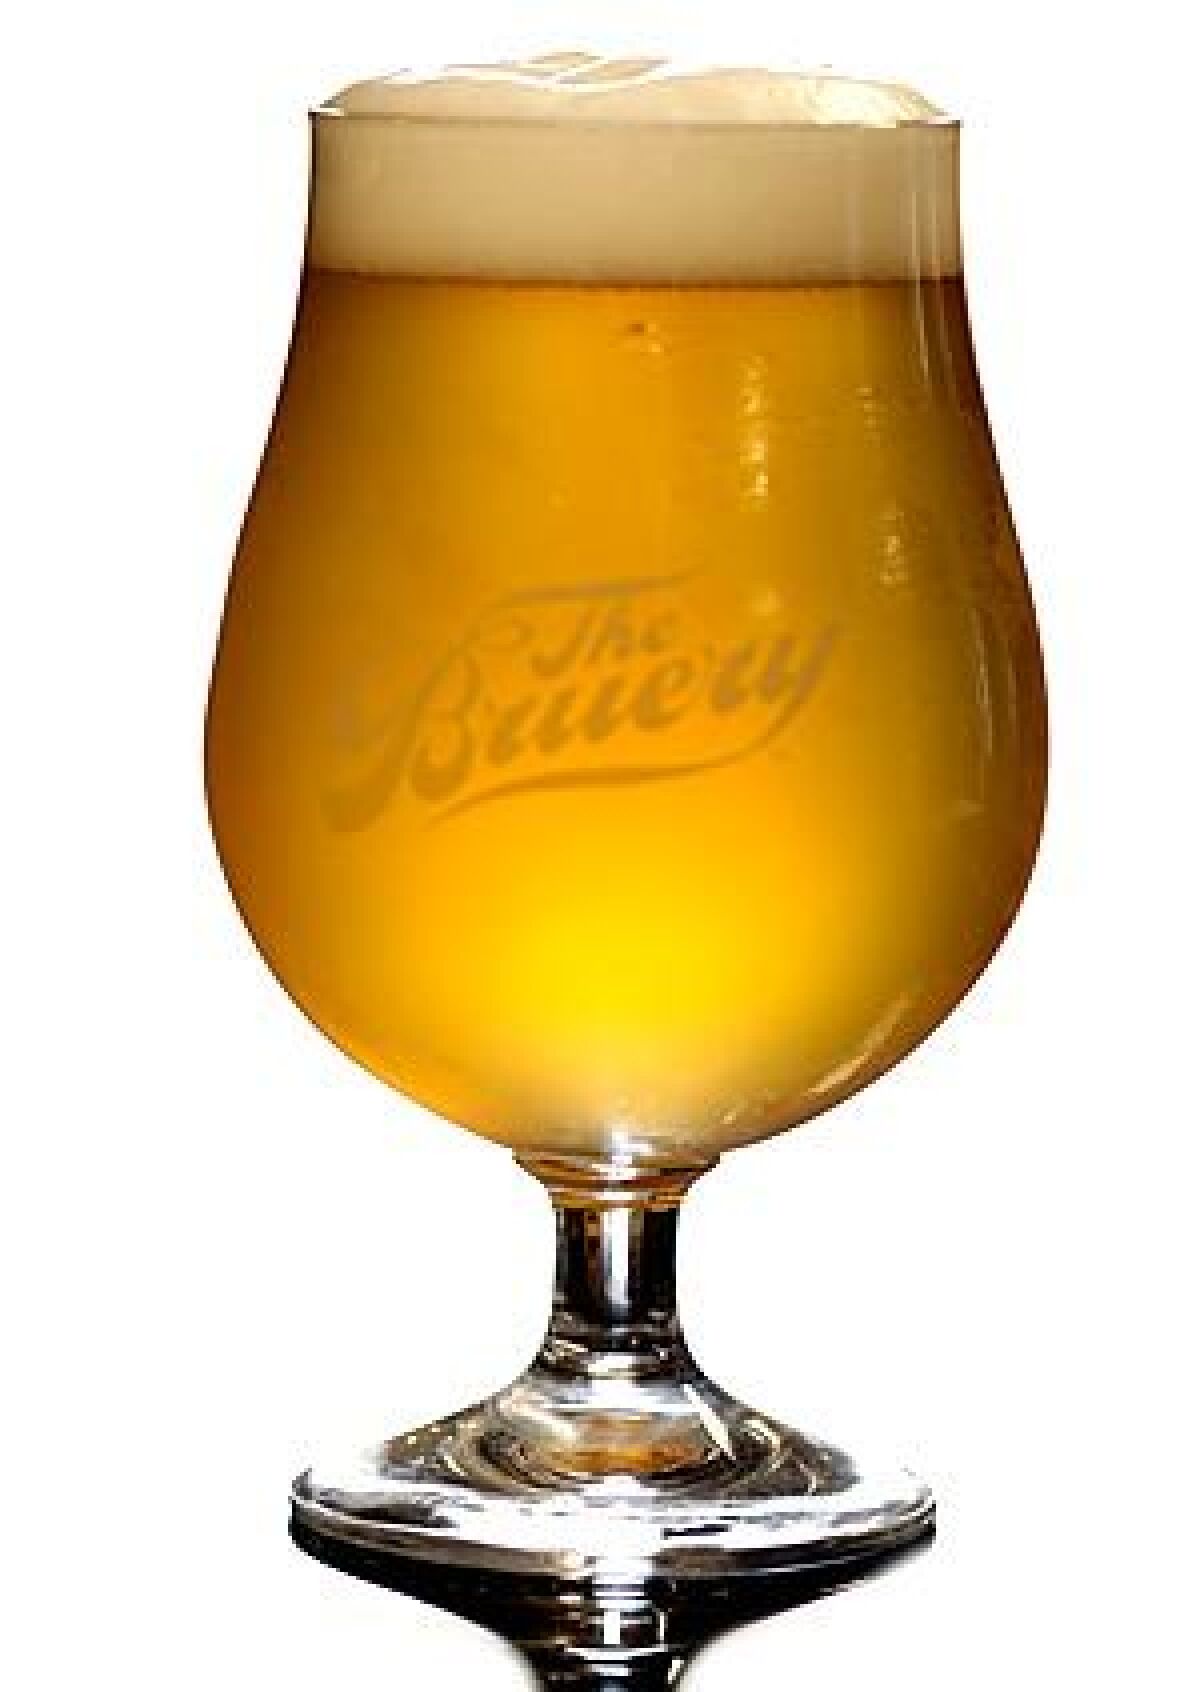 Sour beer from the Bruery in Placentia.